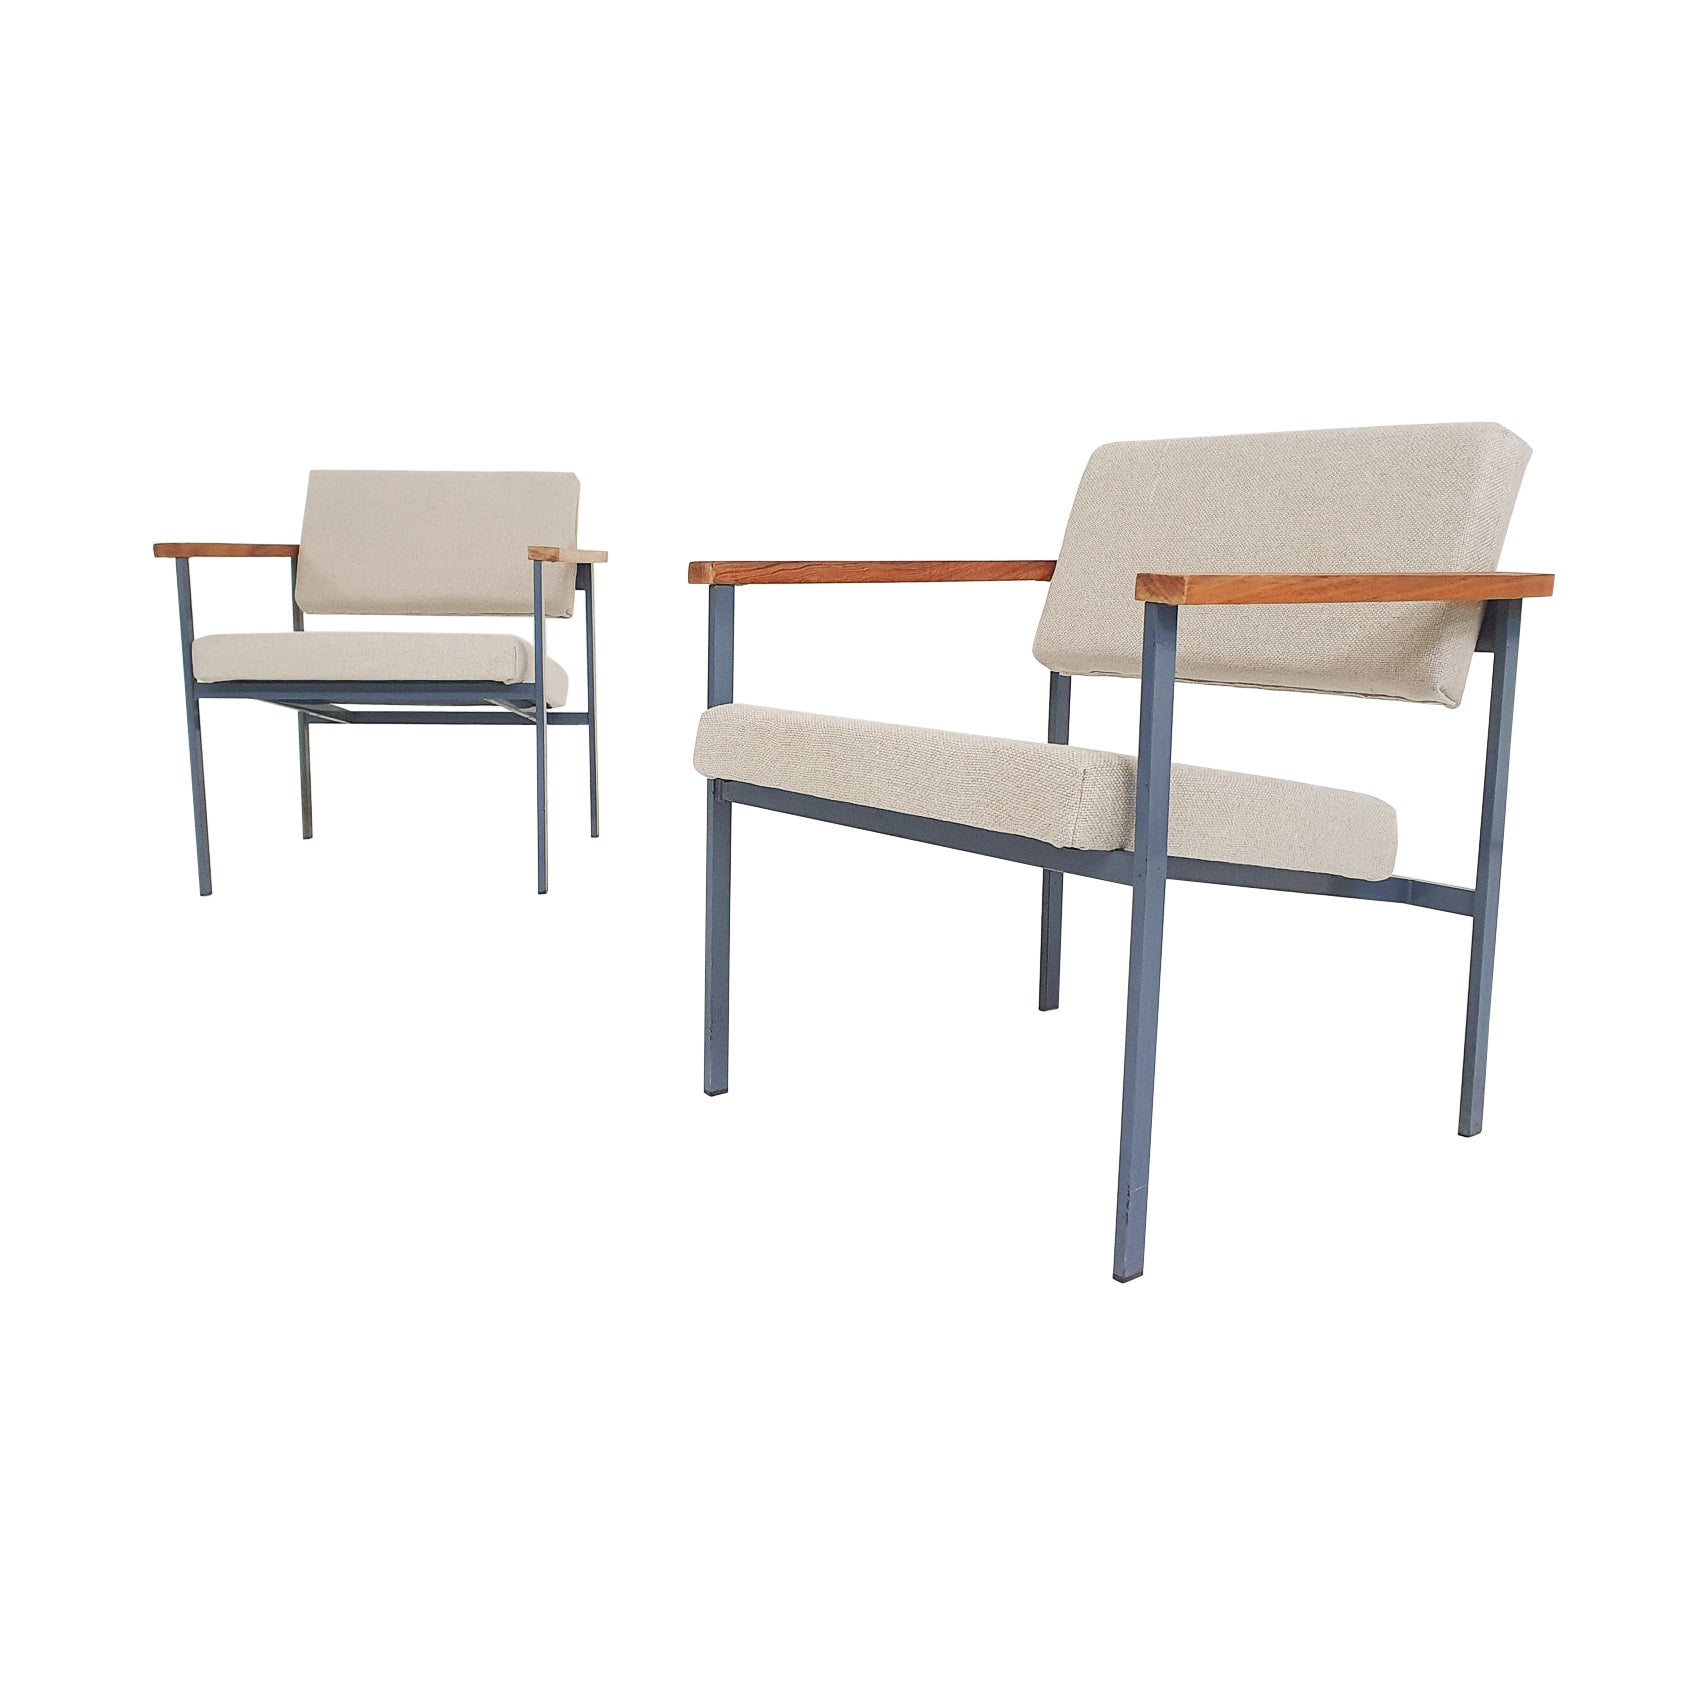 Set of two lounge chairs by Marko, The Netherlands, 1960's